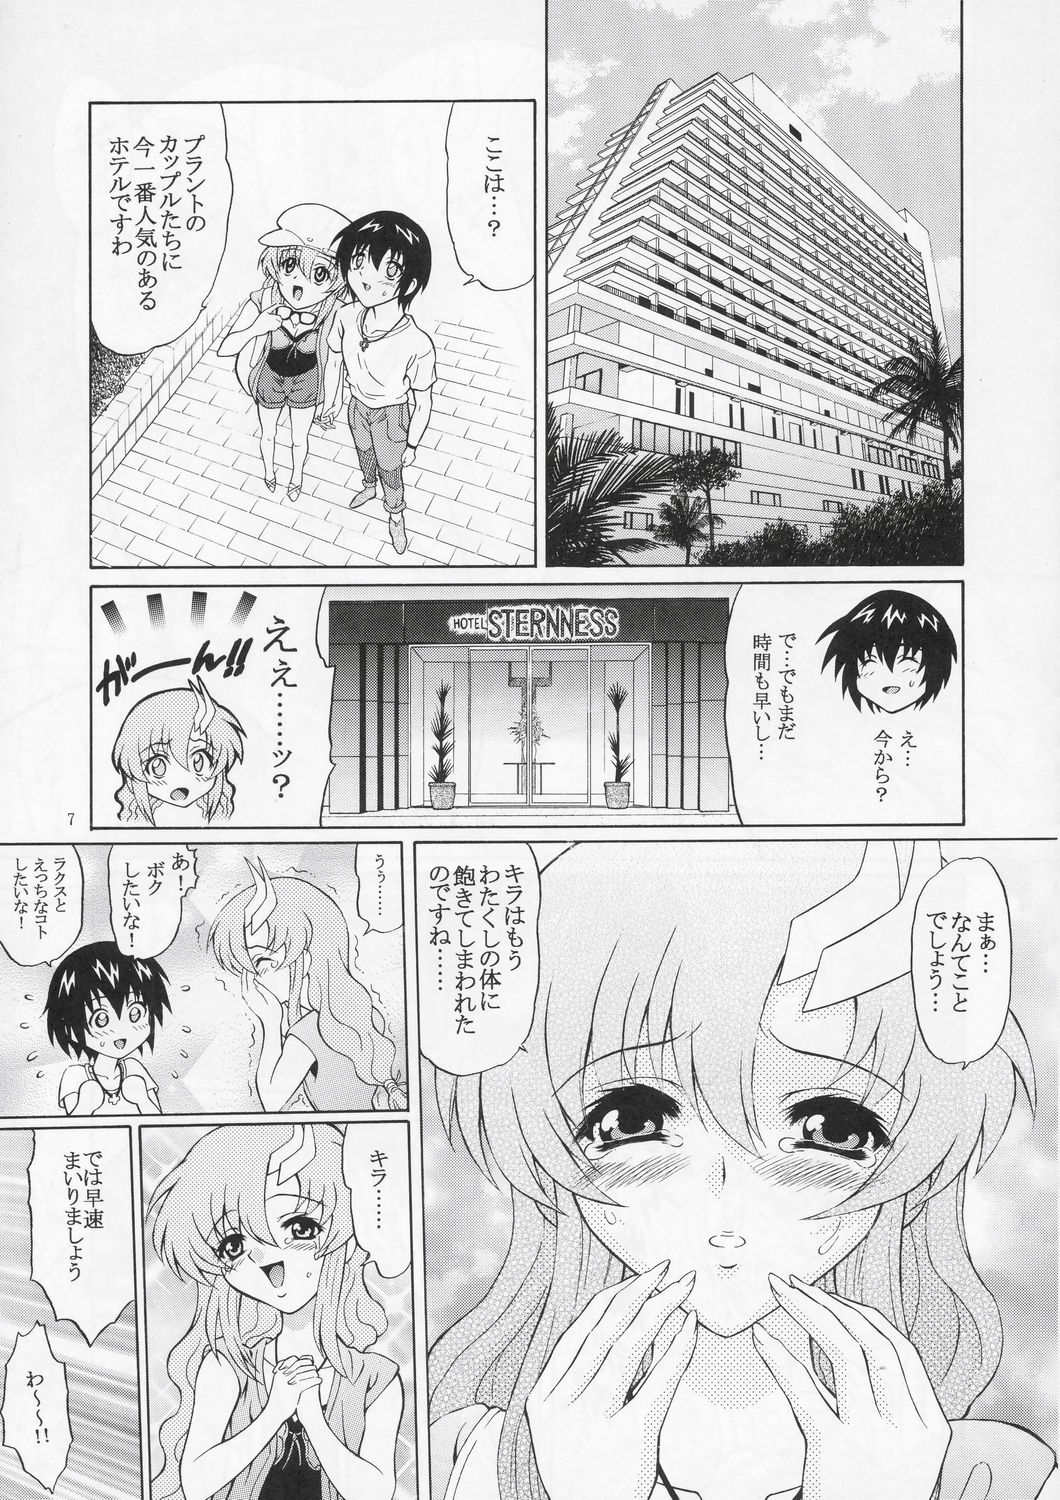 (C66) [GUST (Harukaze Soyogu)] Sternness 3 (Mobile Suit Gundam SEED) page 6 full